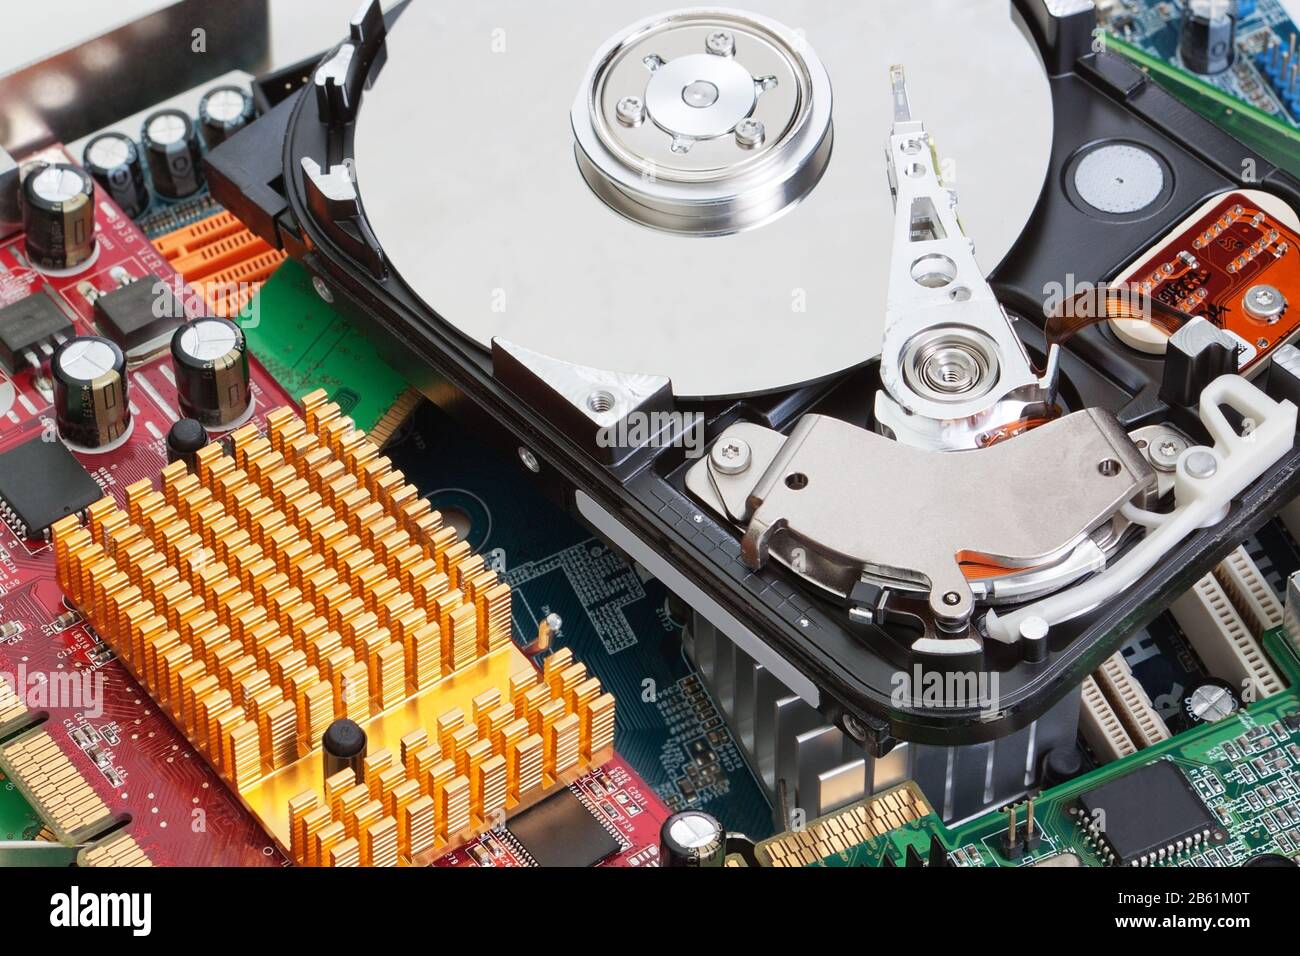 A pile of computer parts motherboard hard drive. Close-up. Stock Photo